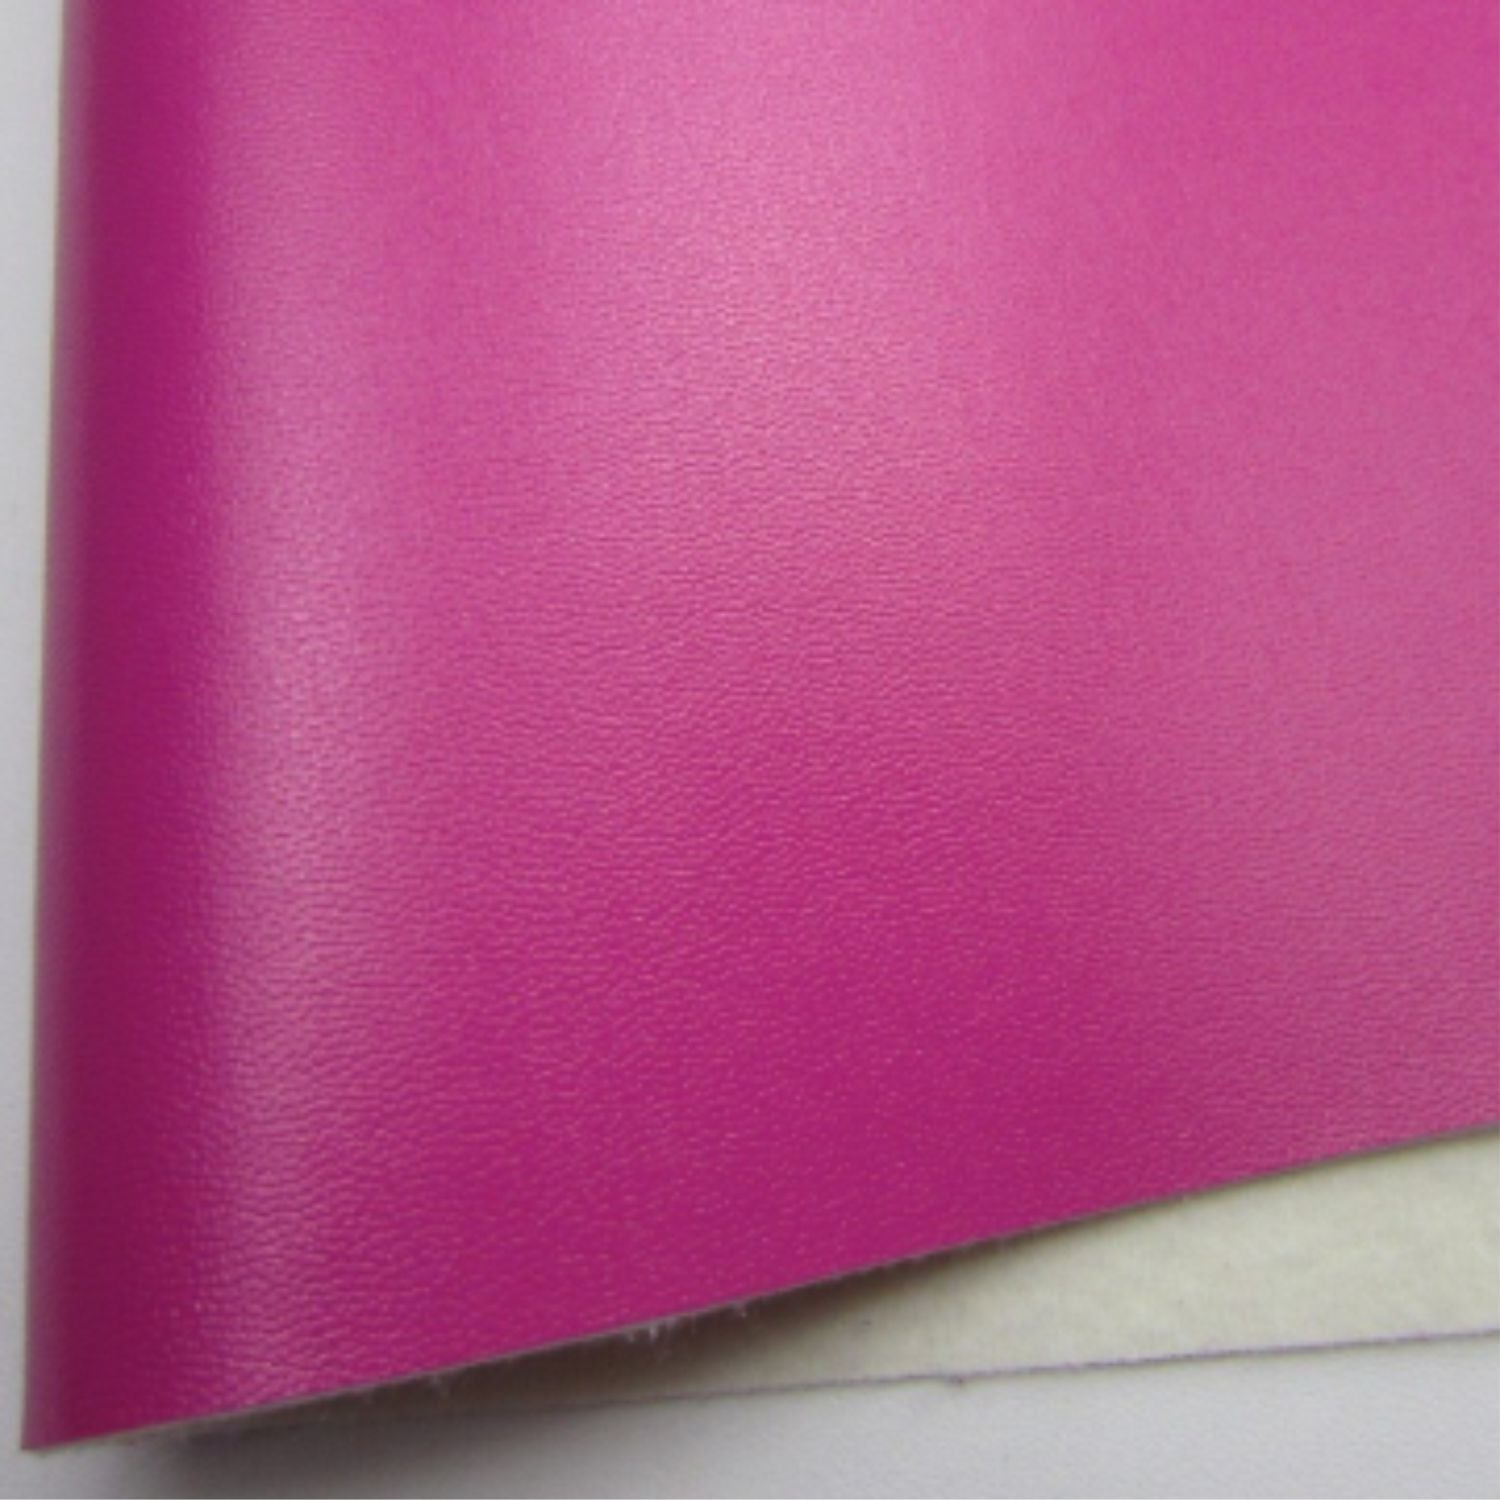 Faux Leather Pink Smooth Fabric Synthetic 11.75in x 12in Sheets ...